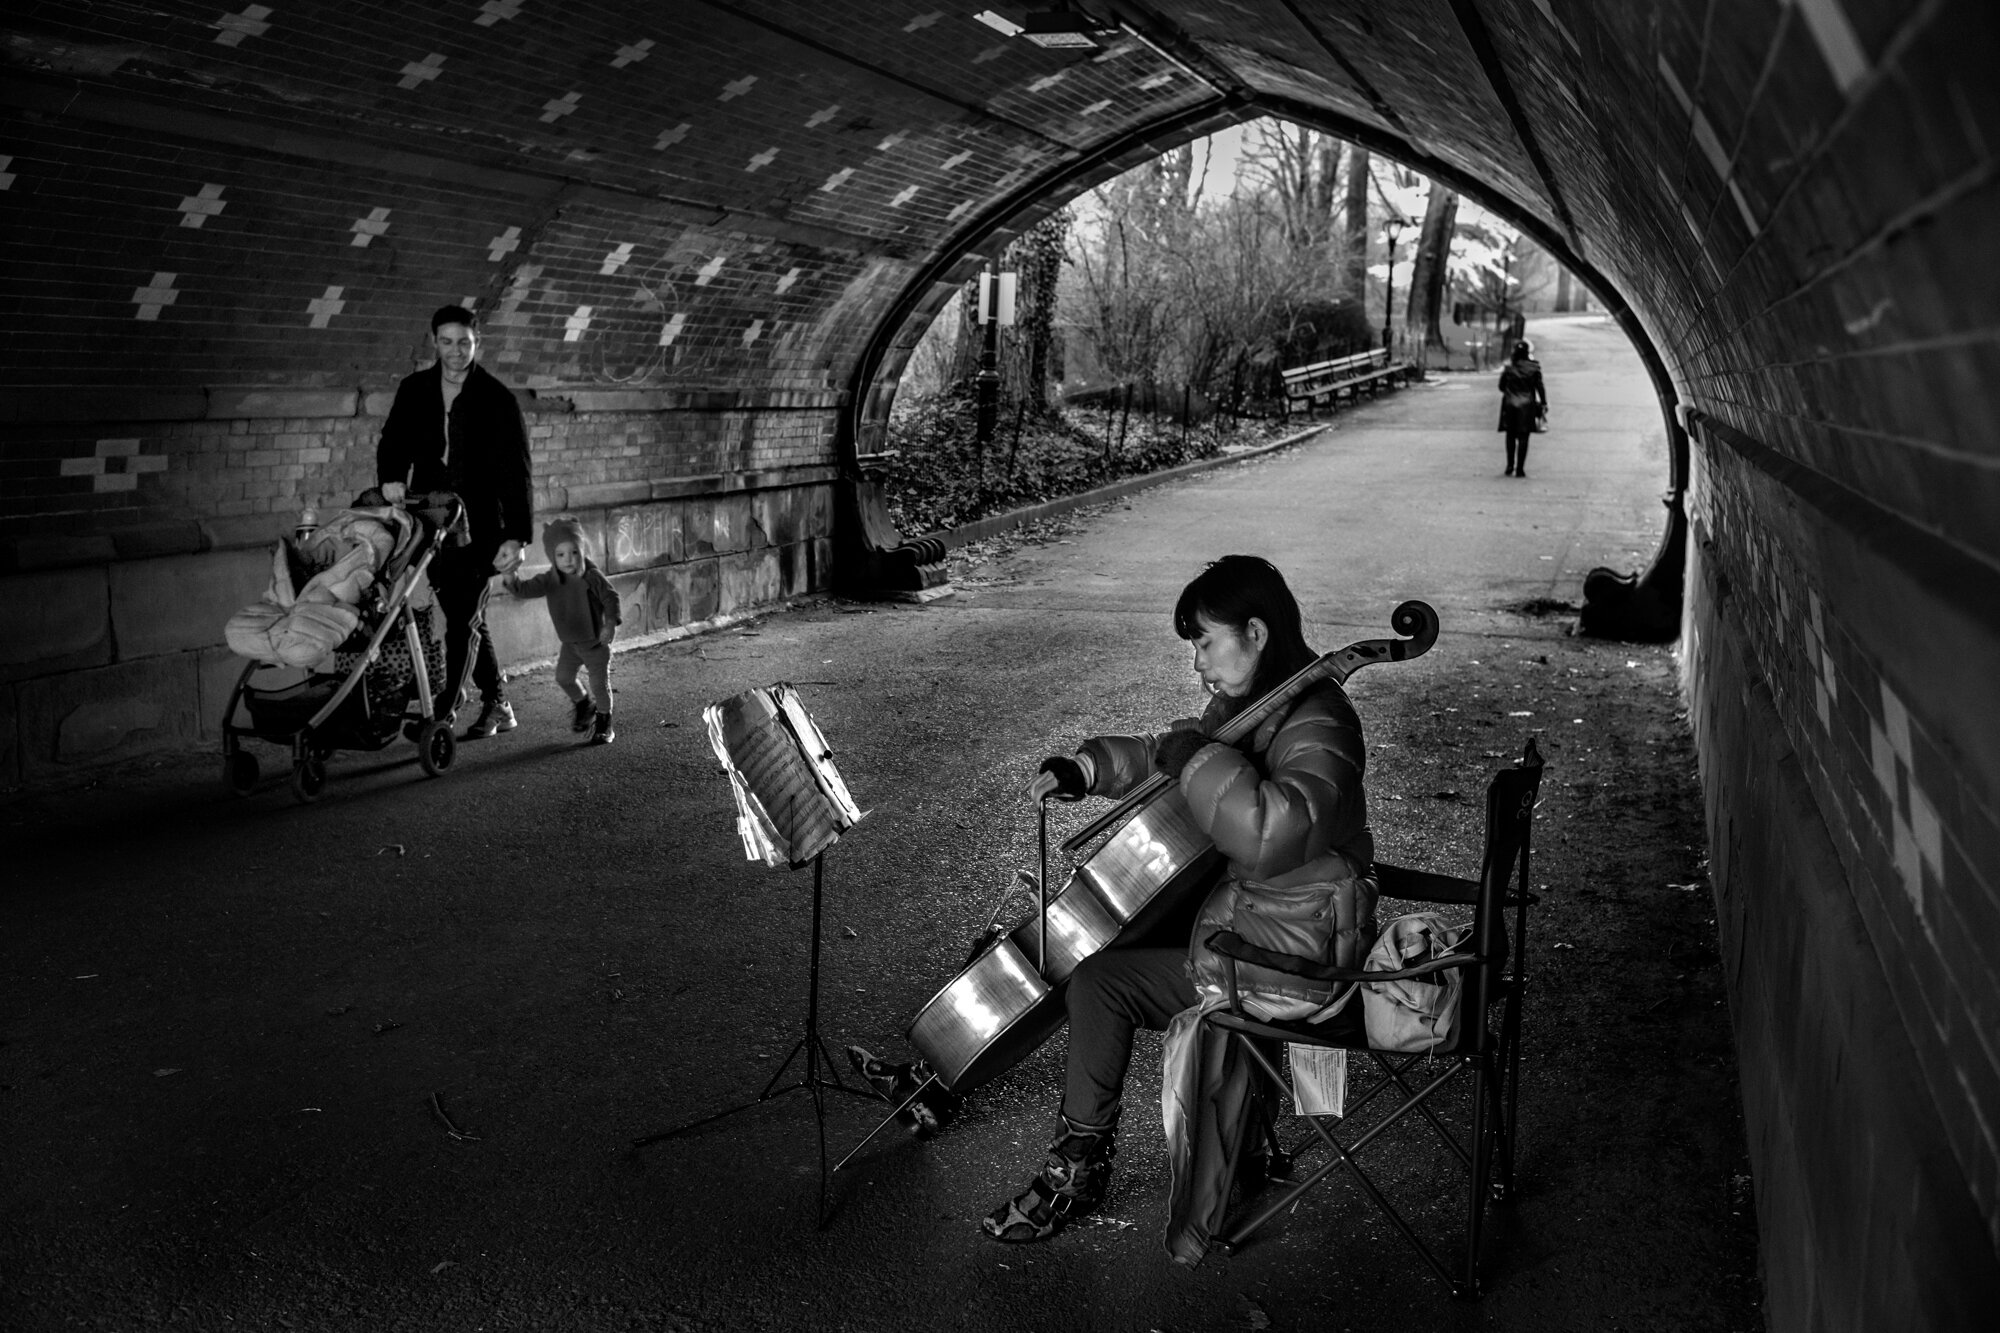  Chi, in her 20ties, originally from Tokyo, playing the Cello in Central Park.  March 31, 2020. ©Peter Turnley.  ID# 09-014 